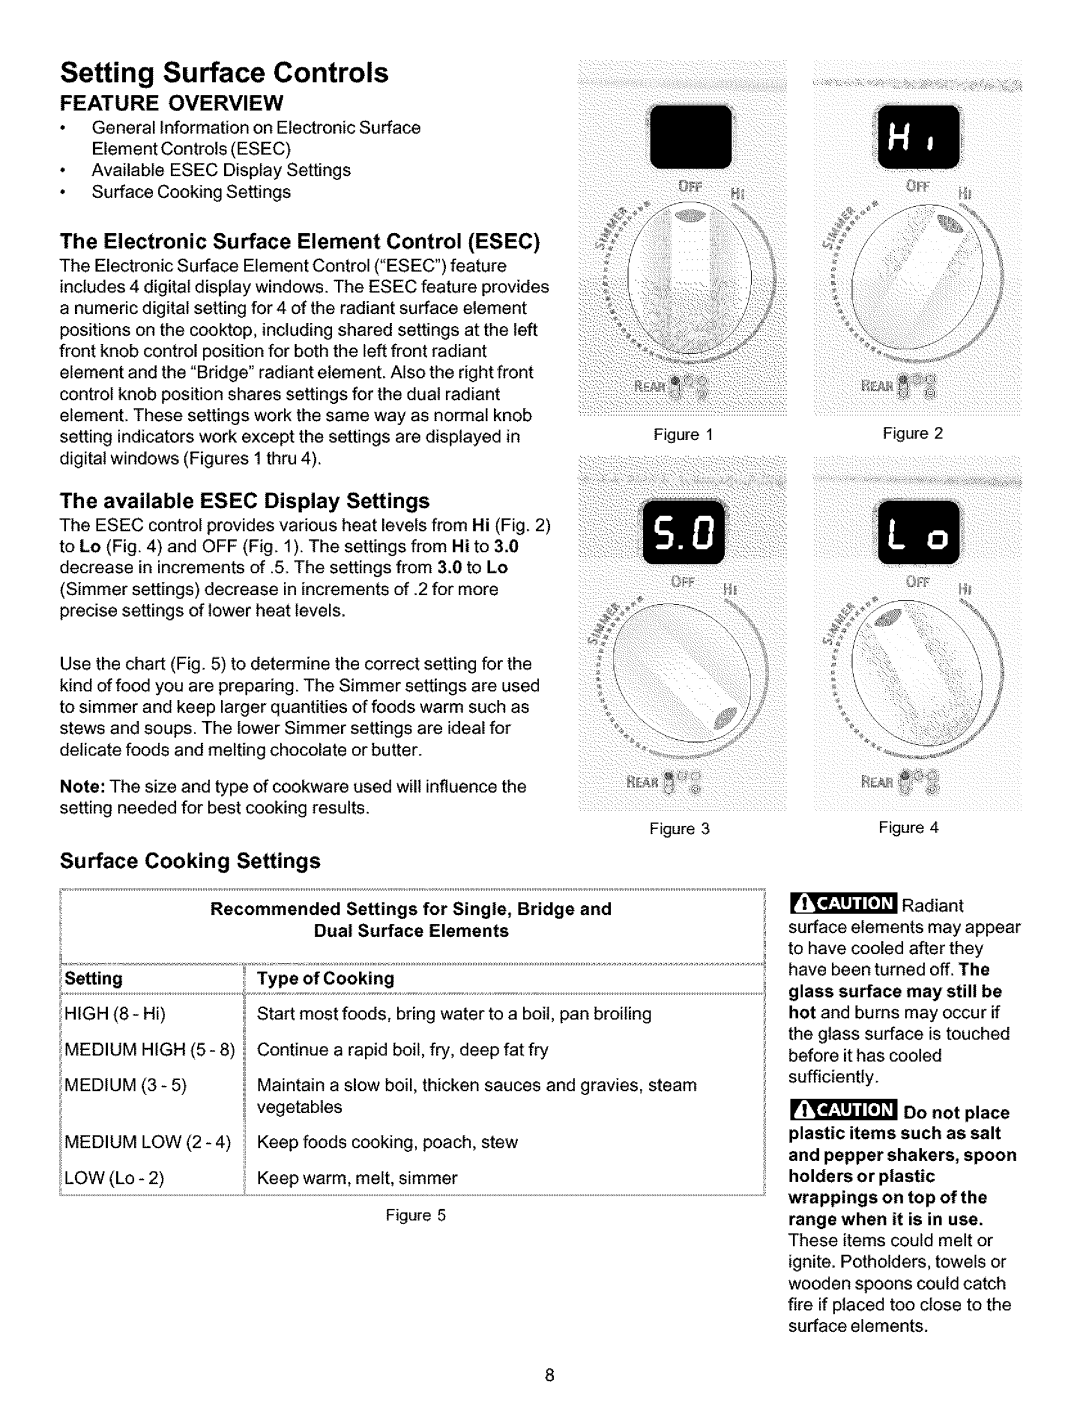 Kenmore 790.99014, 790.99013, 790.99019 manual Setting Surface Controls, Surface Cooking Settings 